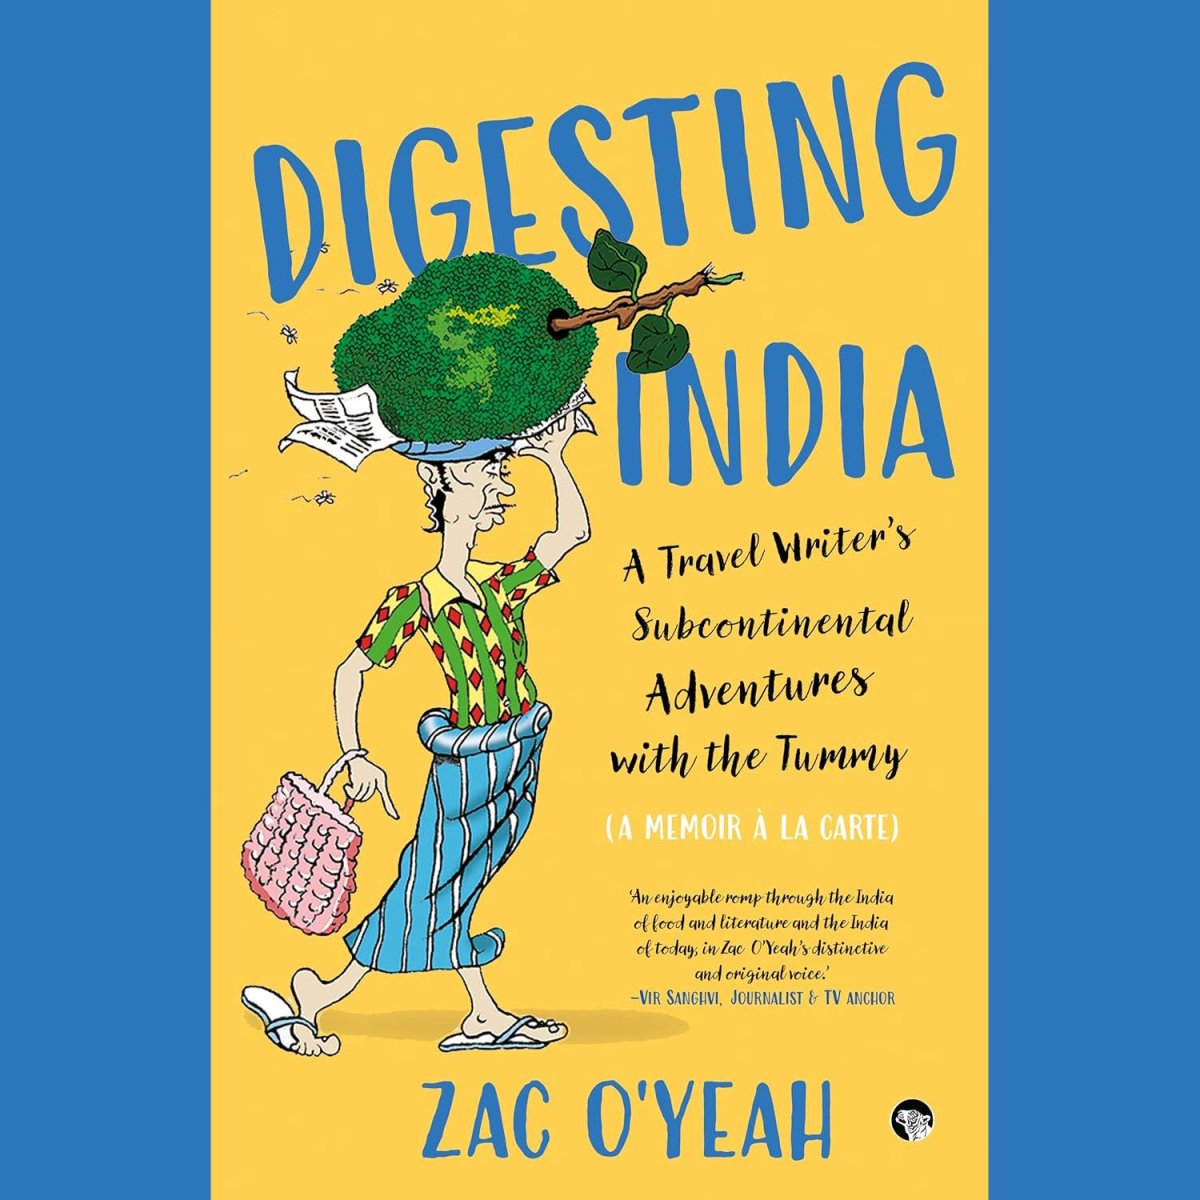 Book Review: Digesting India